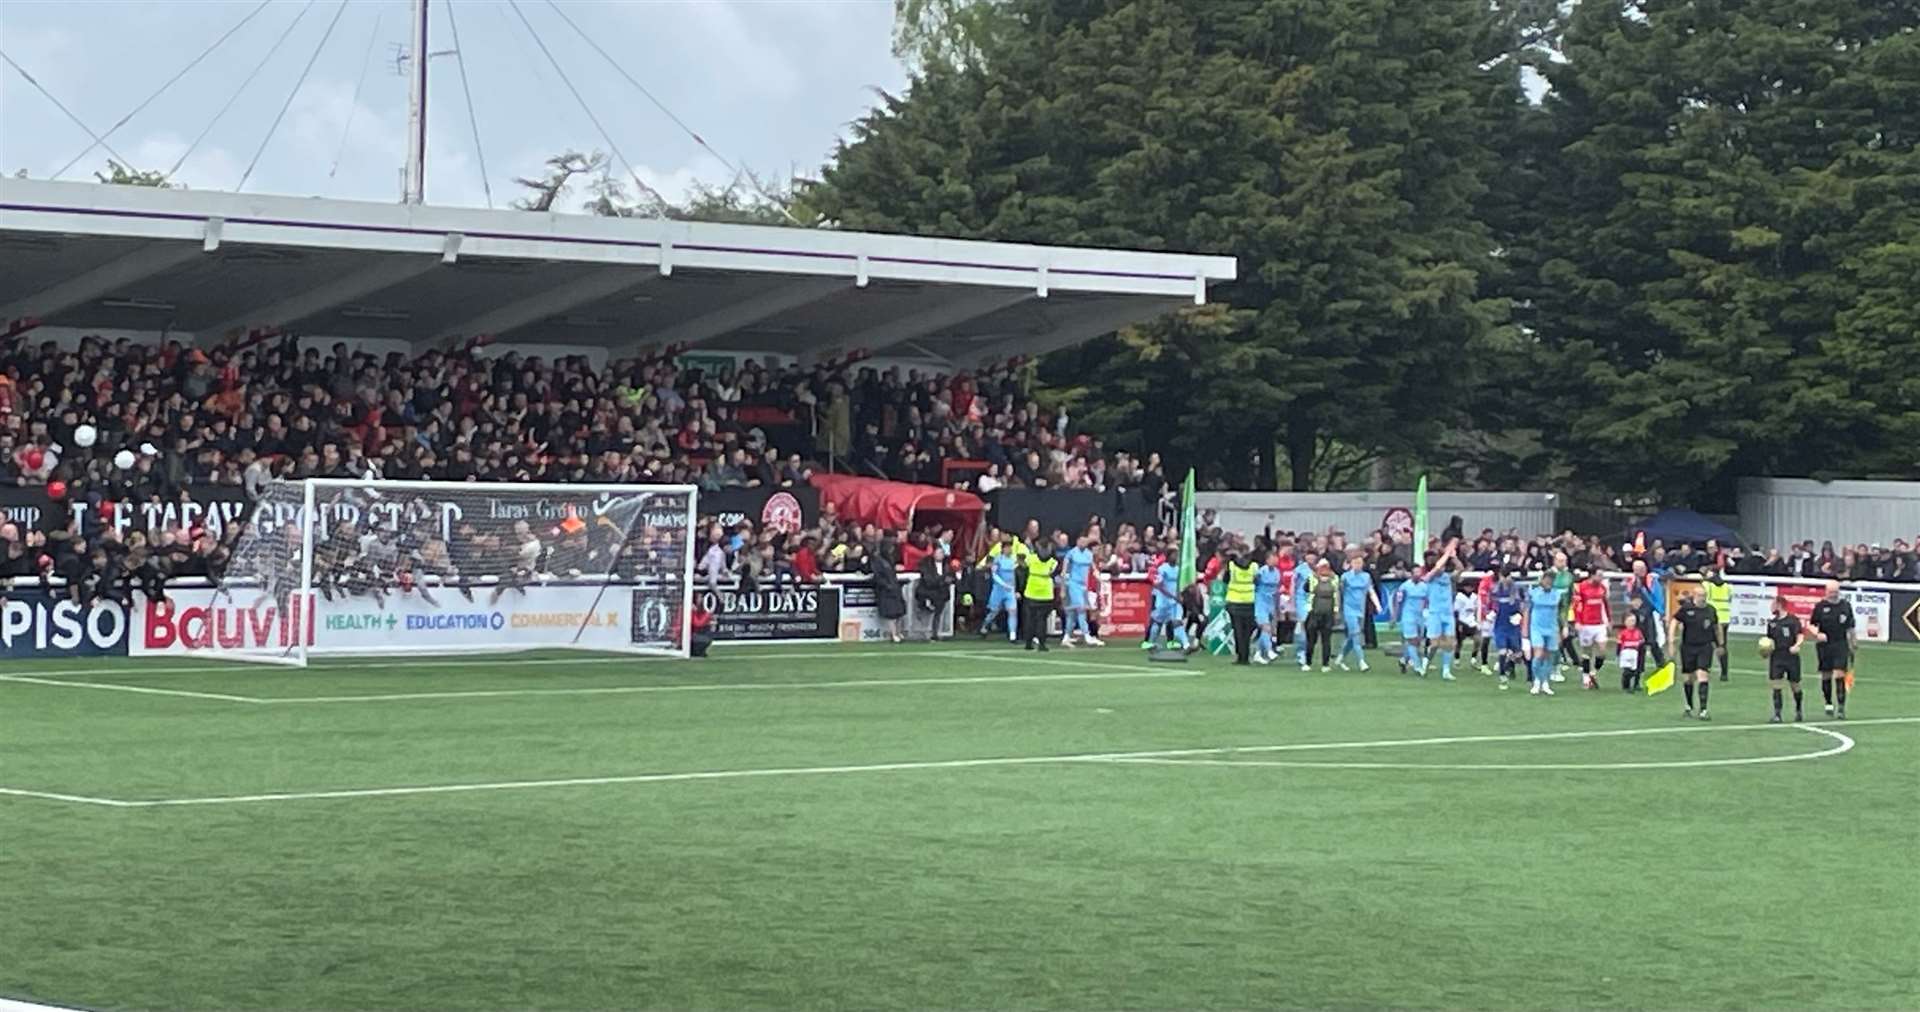 Chatham Town's Bauvill Stadium was packed for their Isthmian Premier Division play-off final